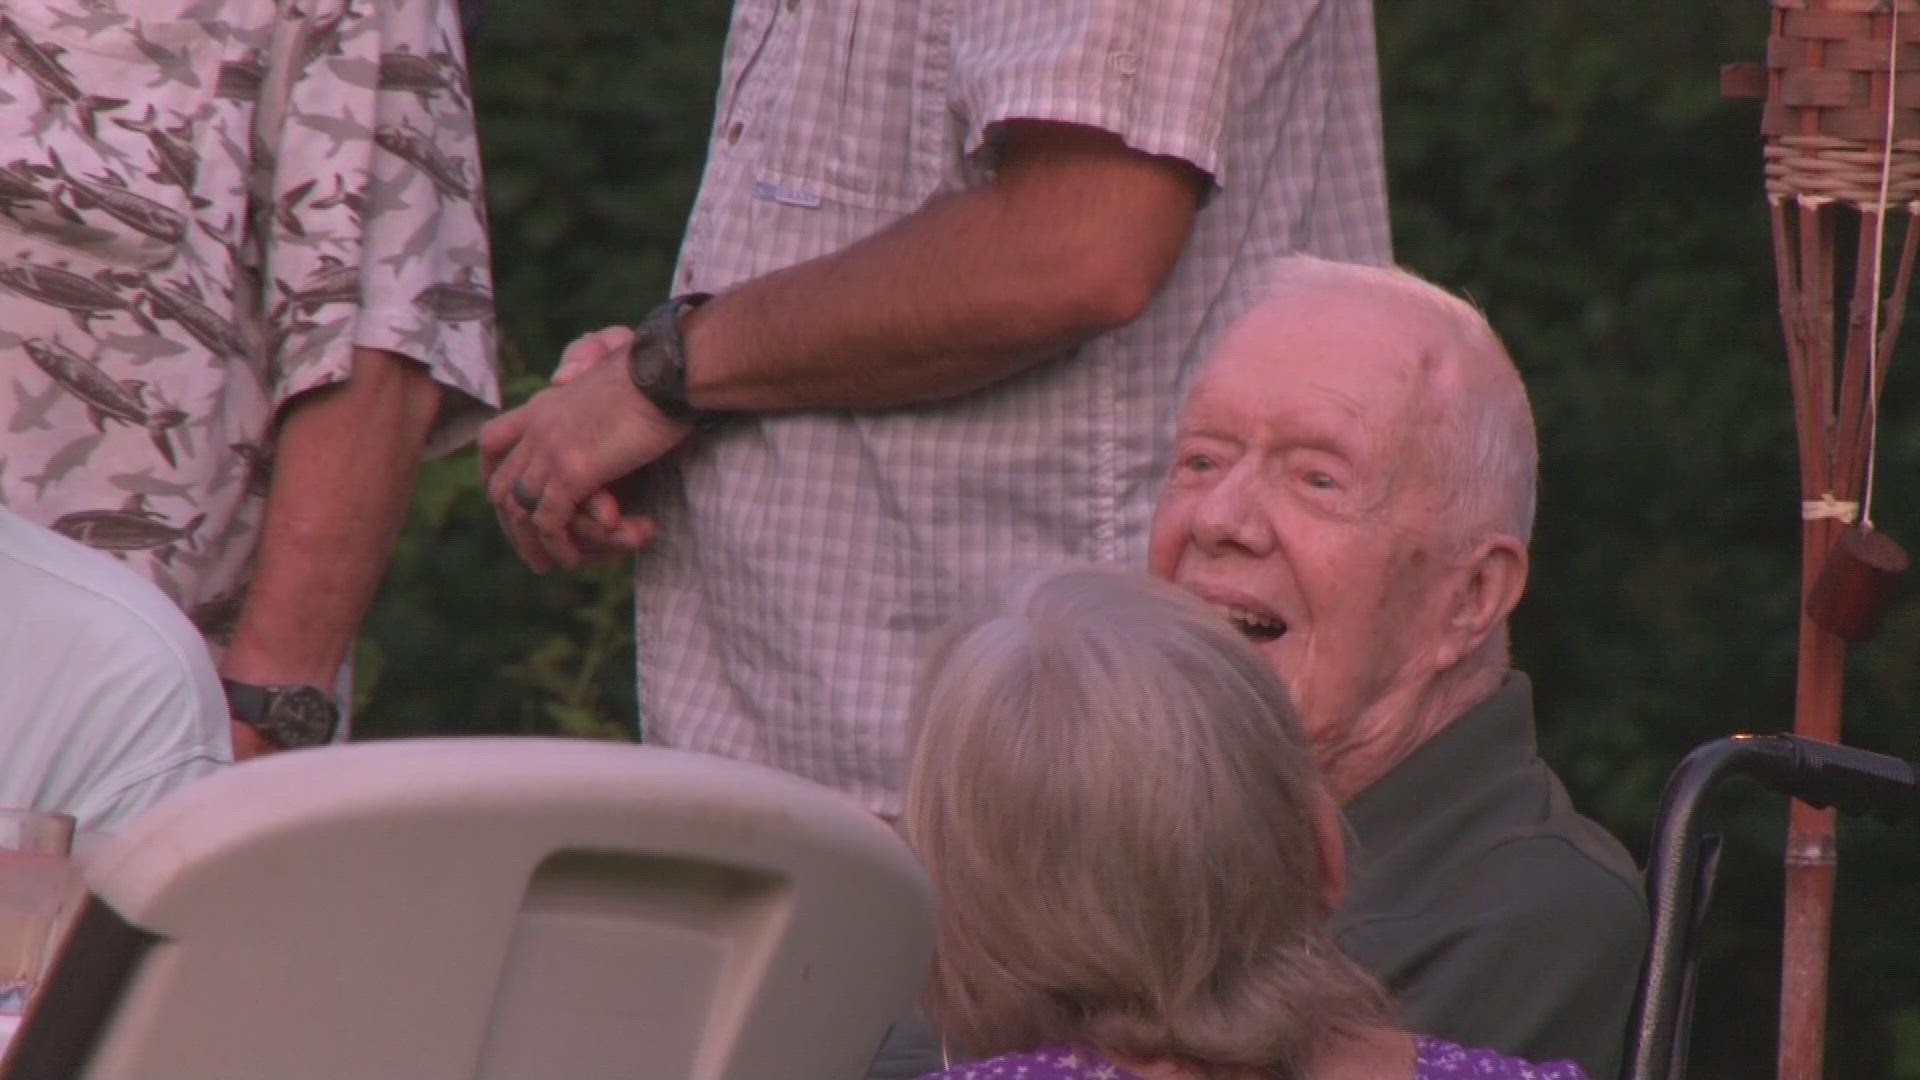 President Carter and First Lady Rosalynn Carter made a rare public appearance this past weekend in Plains, Georgia, ahead of the First Lady's birthday on Thursday.